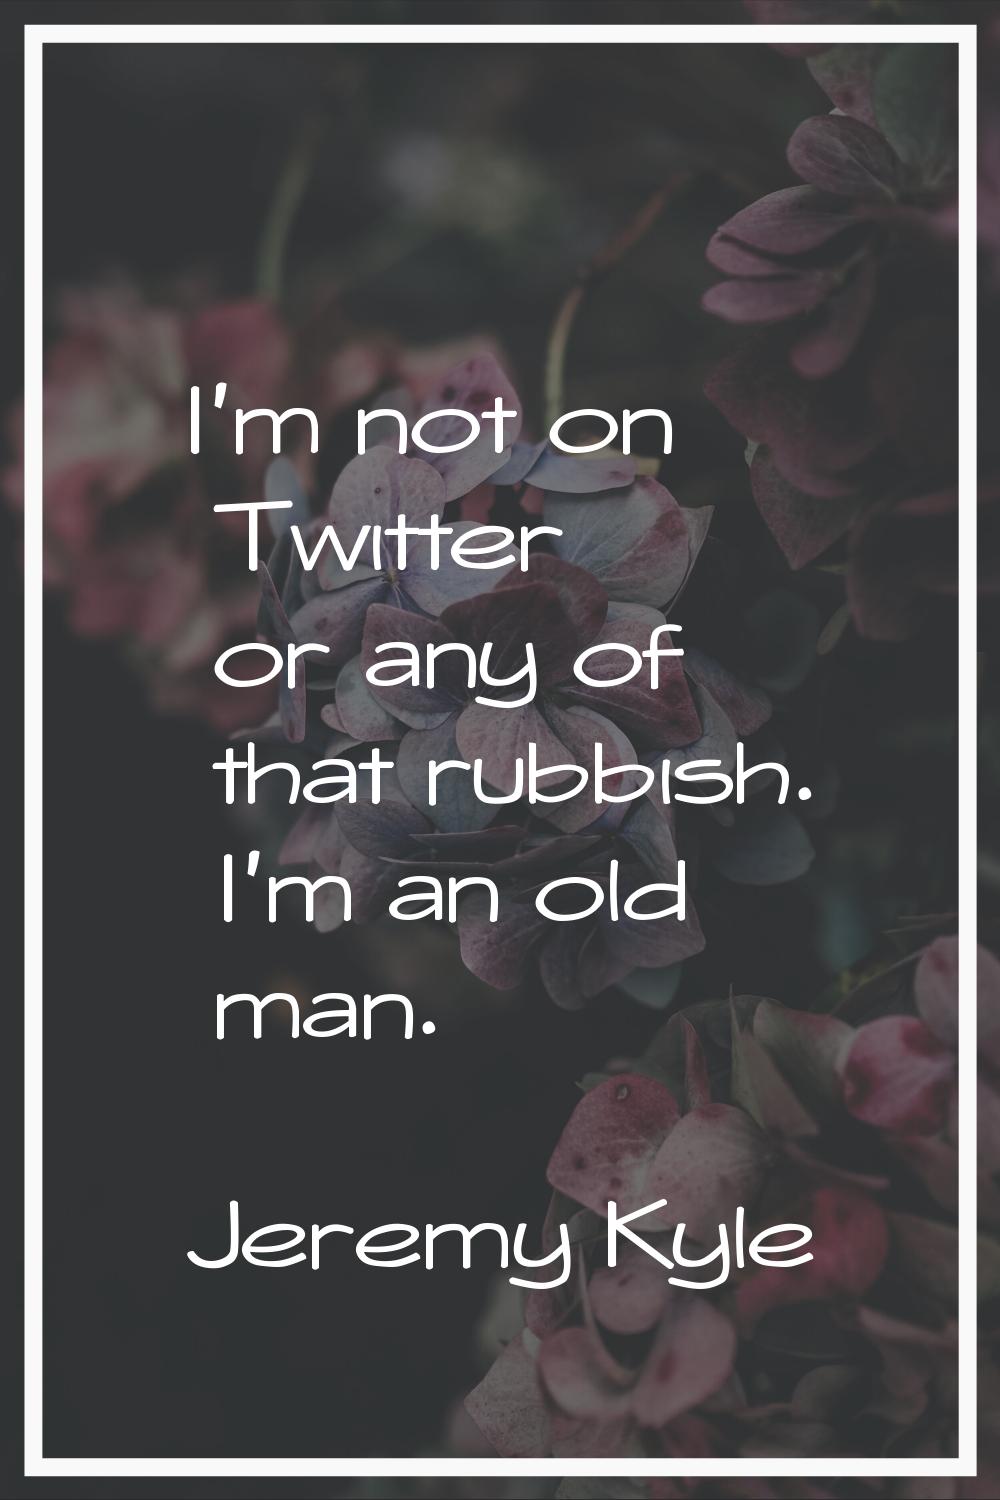 I'm not on Twitter or any of that rubbish. I'm an old man.